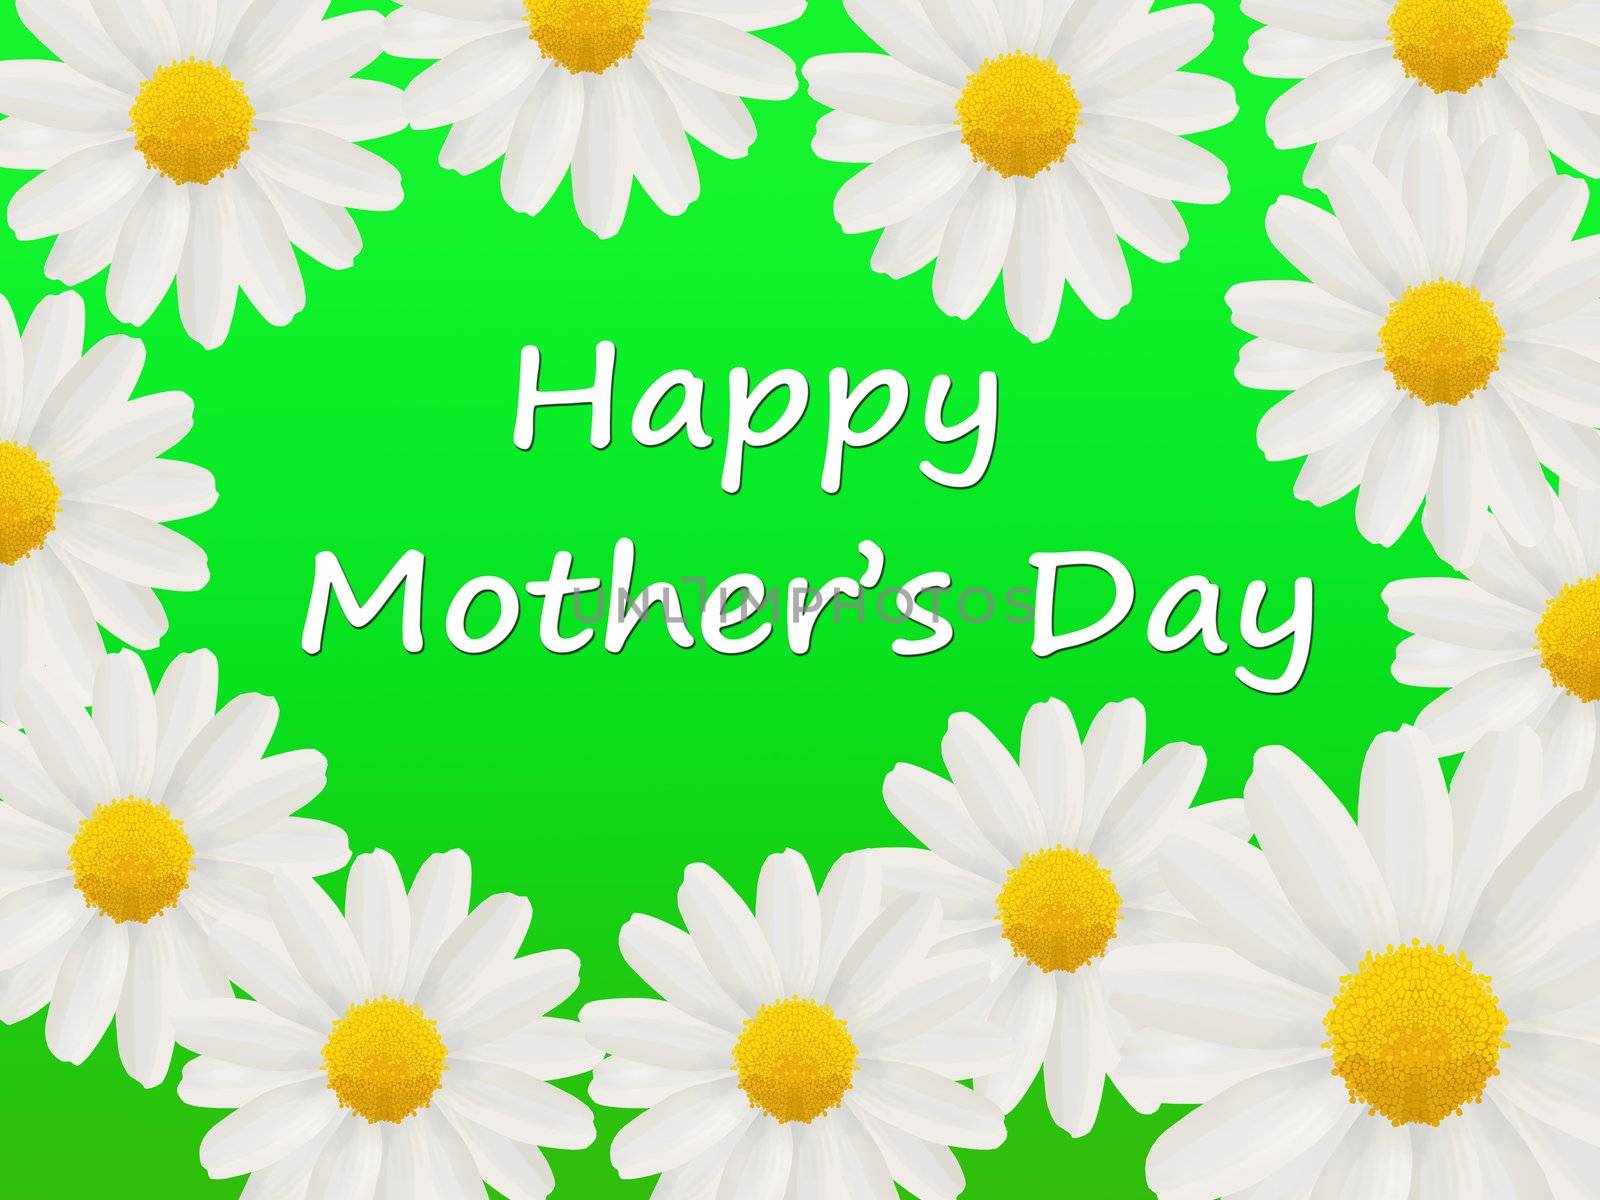 Happy Mother's Day card with daisies by acremead